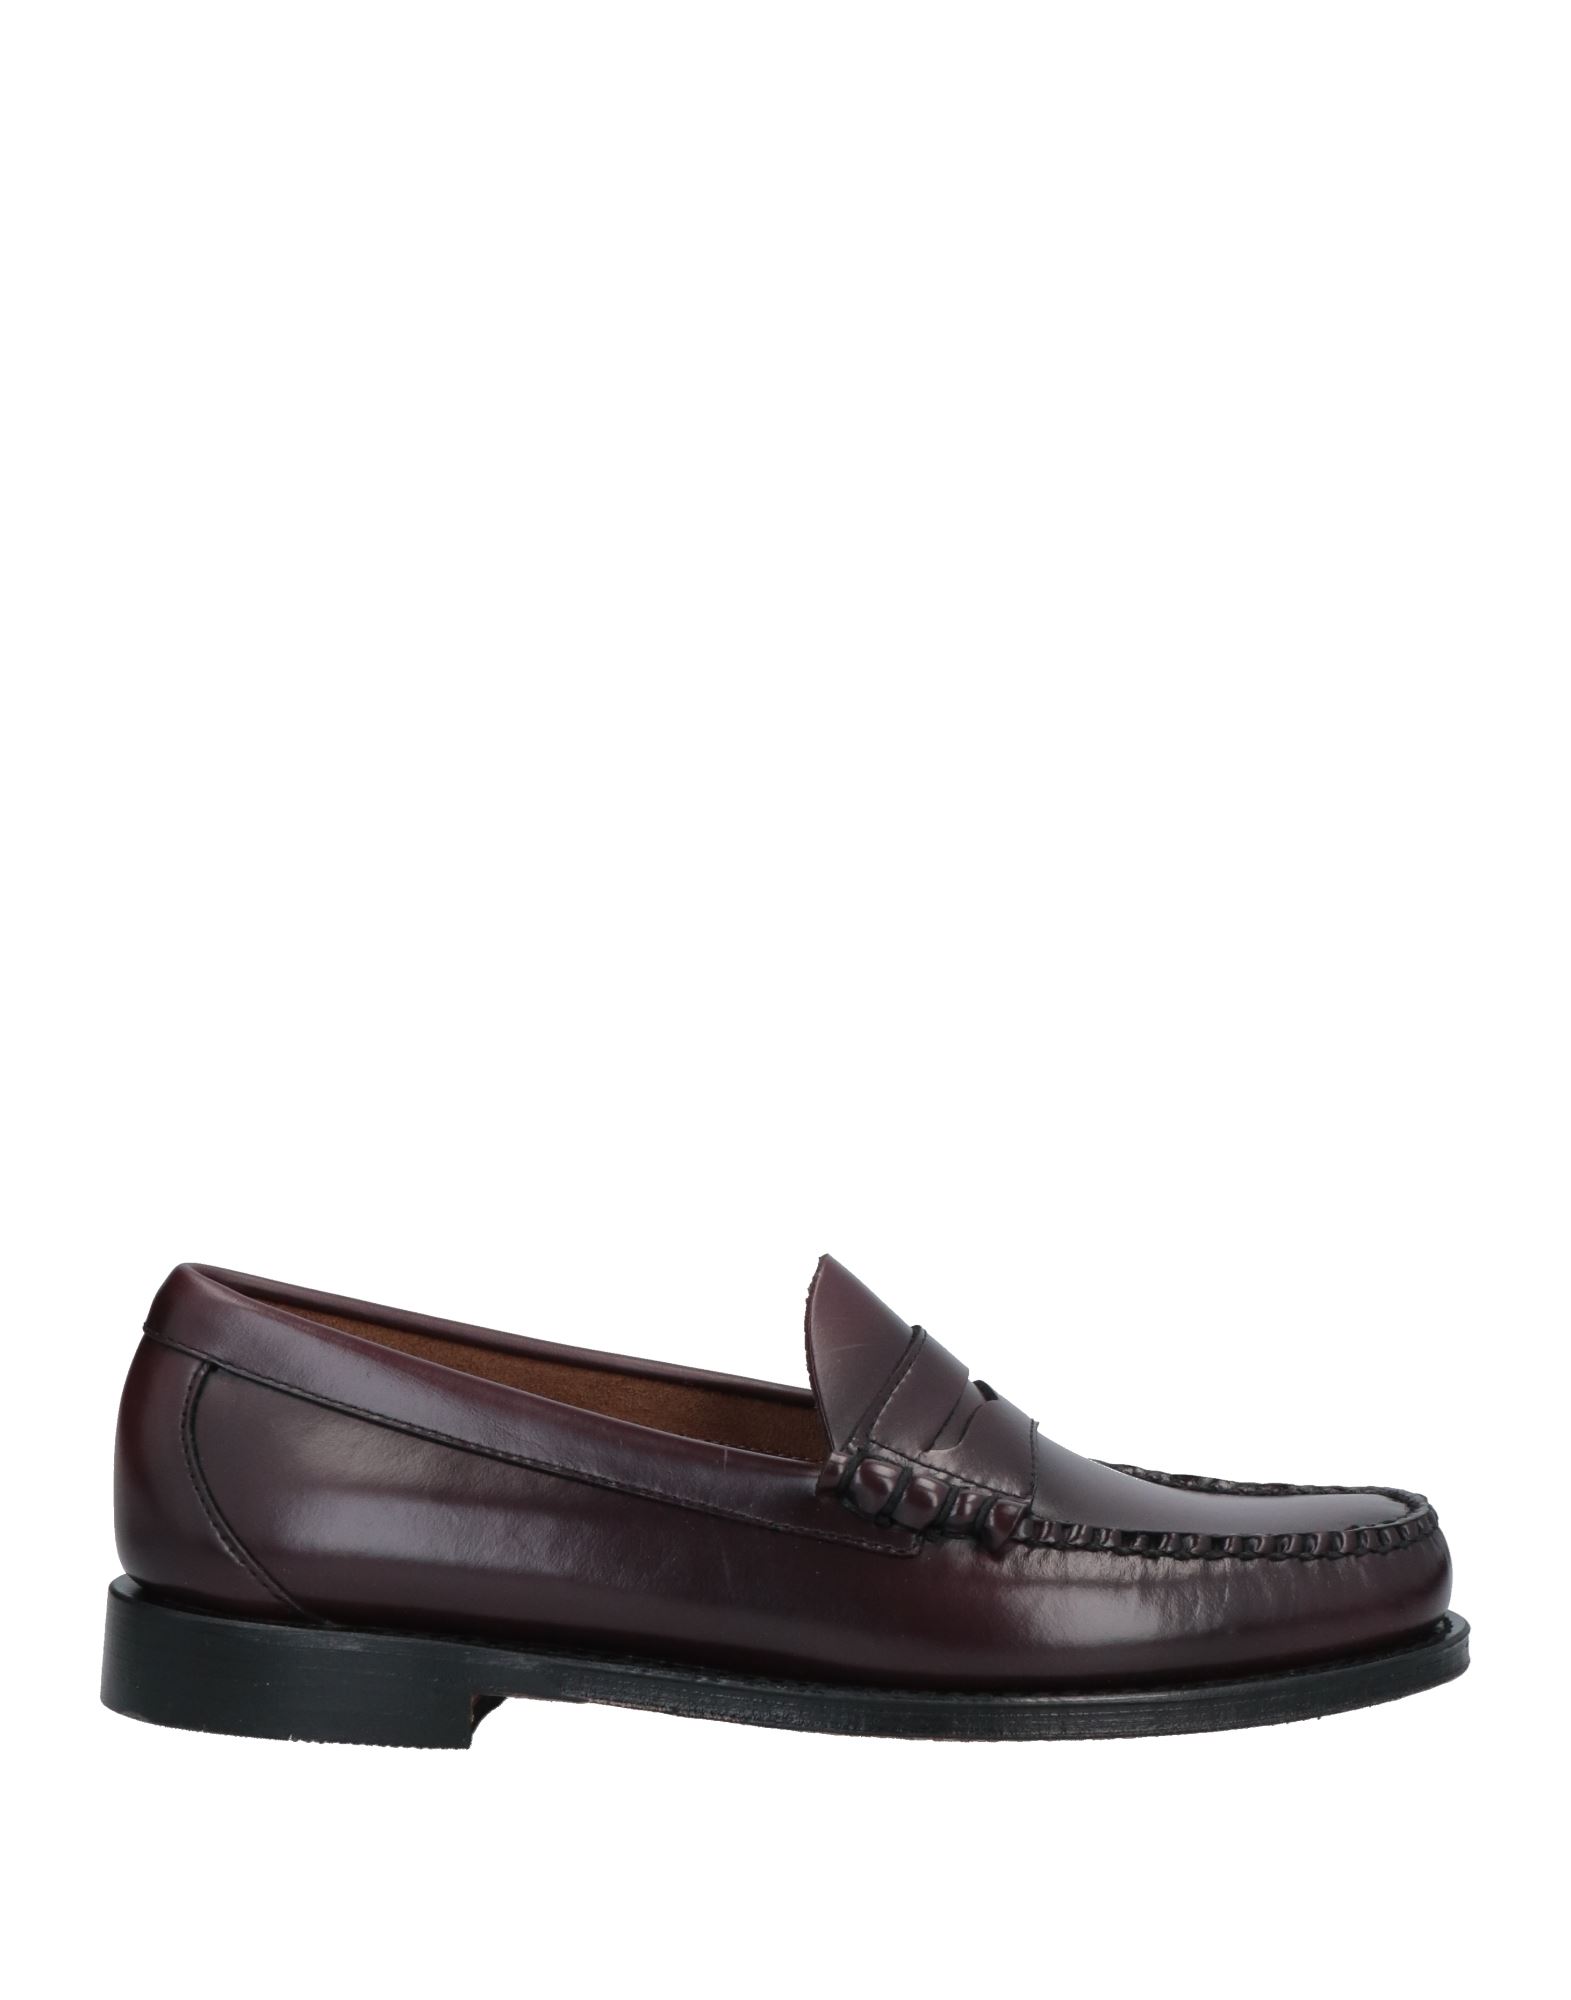 G.h. Bass & Co Brown Weejuns Lincoln Leather Penny Loafers - Men's - Calf Leather In Red